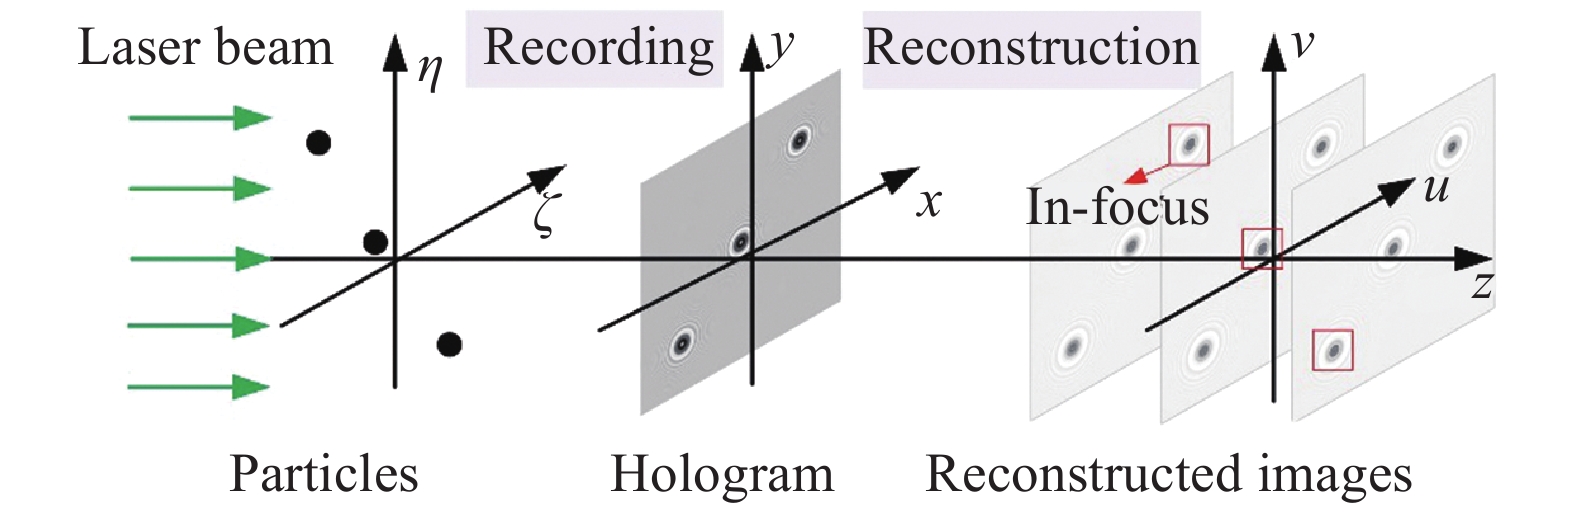 Recording and reconstruction of digital holography